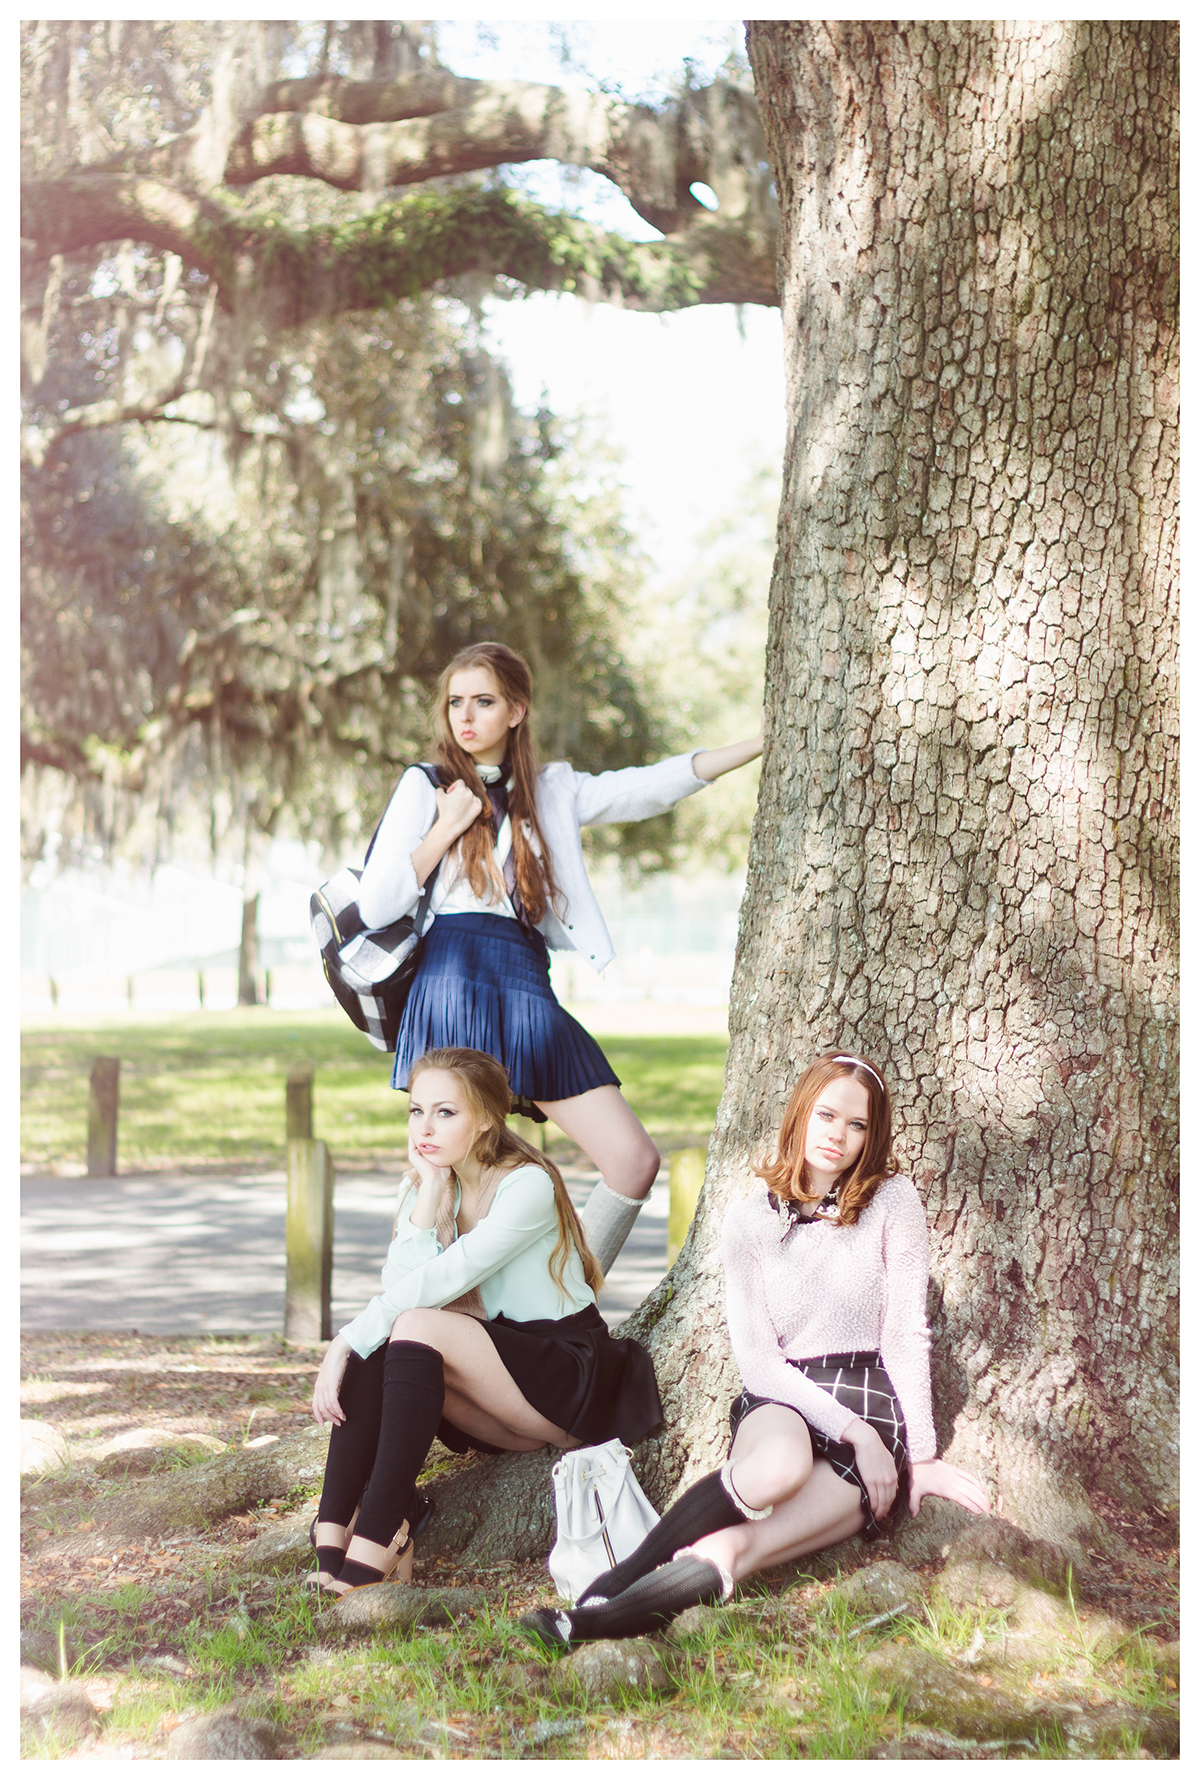 Lookbook wildfox girl Squad clique group models styling  fashionphotography dreamy Outdoor schoolyard High School teenage